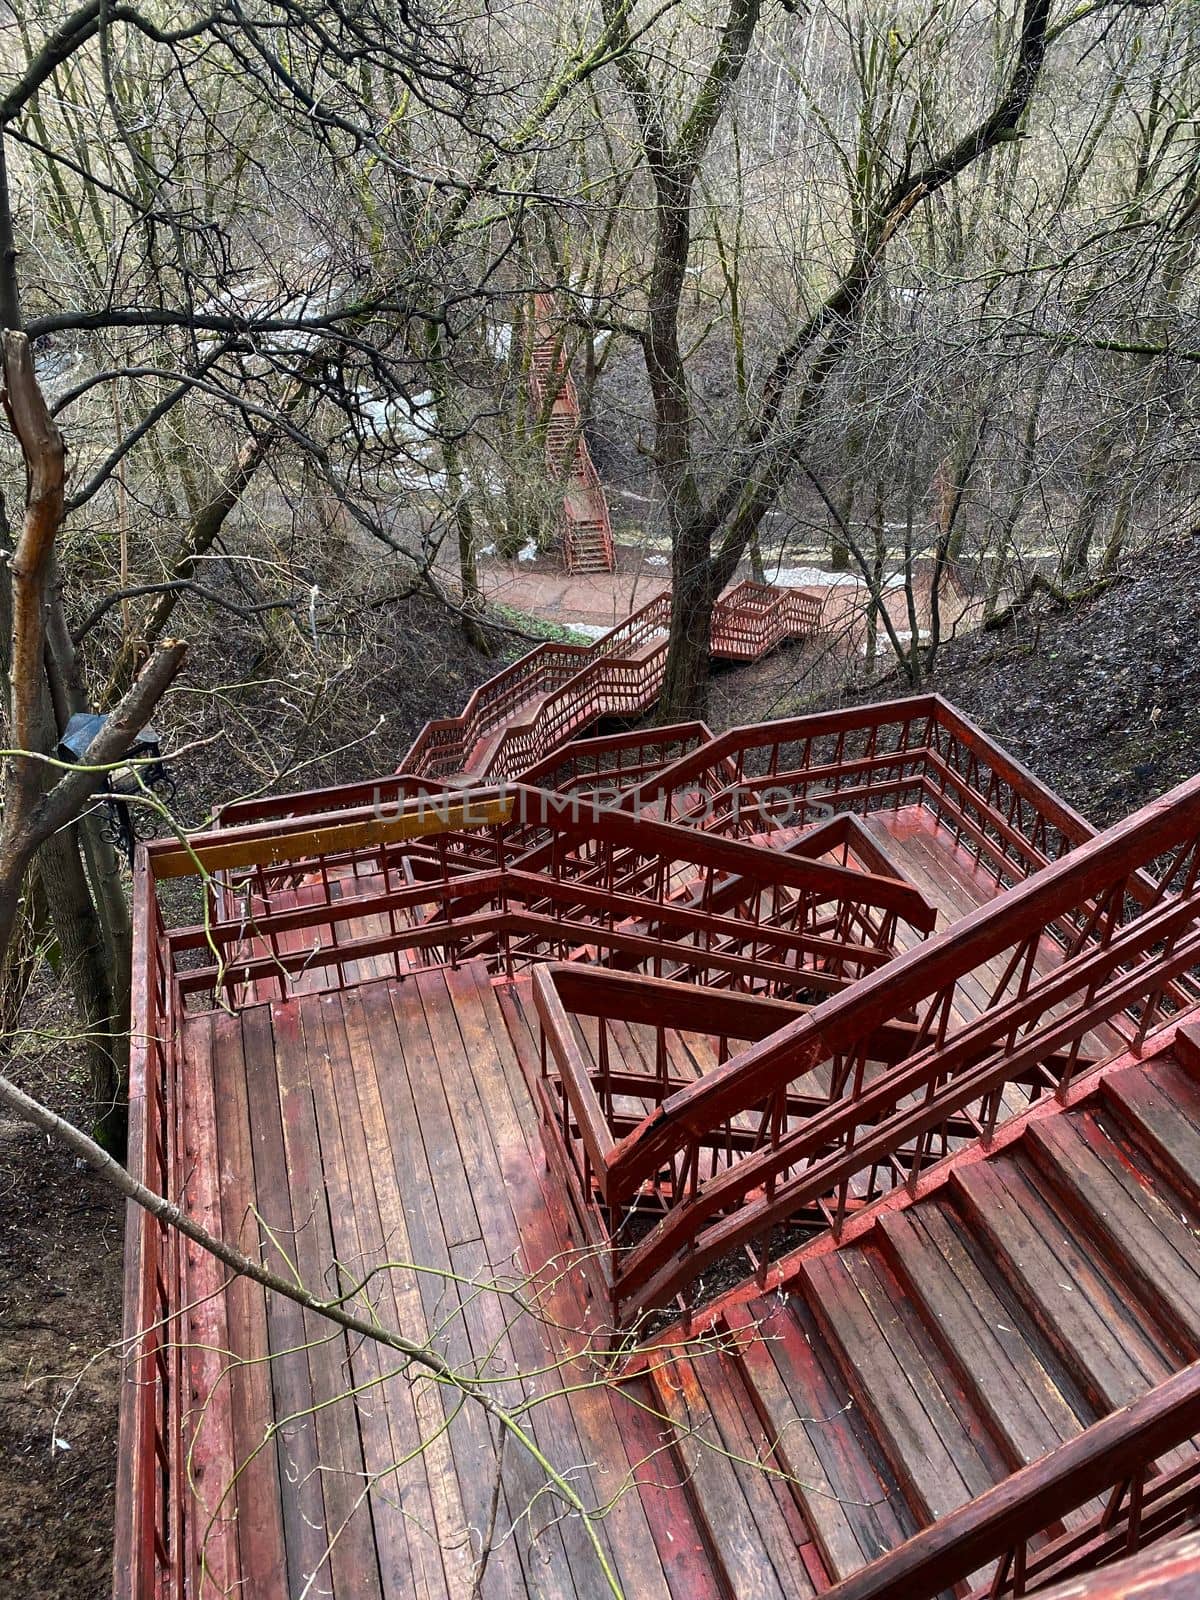 Staircase in the park. The photo shows red wooden stairs in the park.